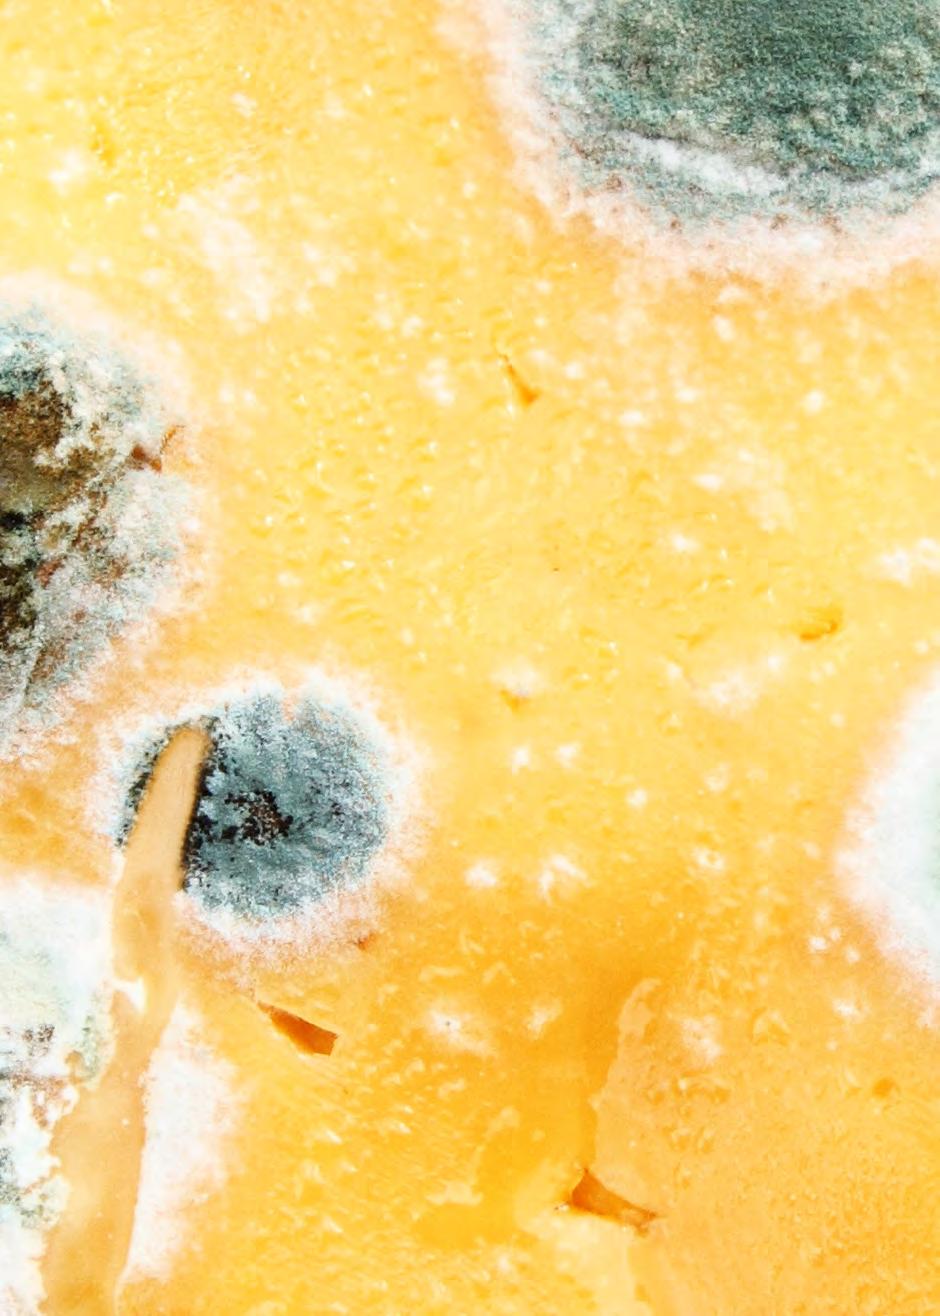 Is it safe to eat mouldy food? The humid climate in New Zealand means that our food is prone to growing mould. If there is mould on my food, do I have to throw it away?